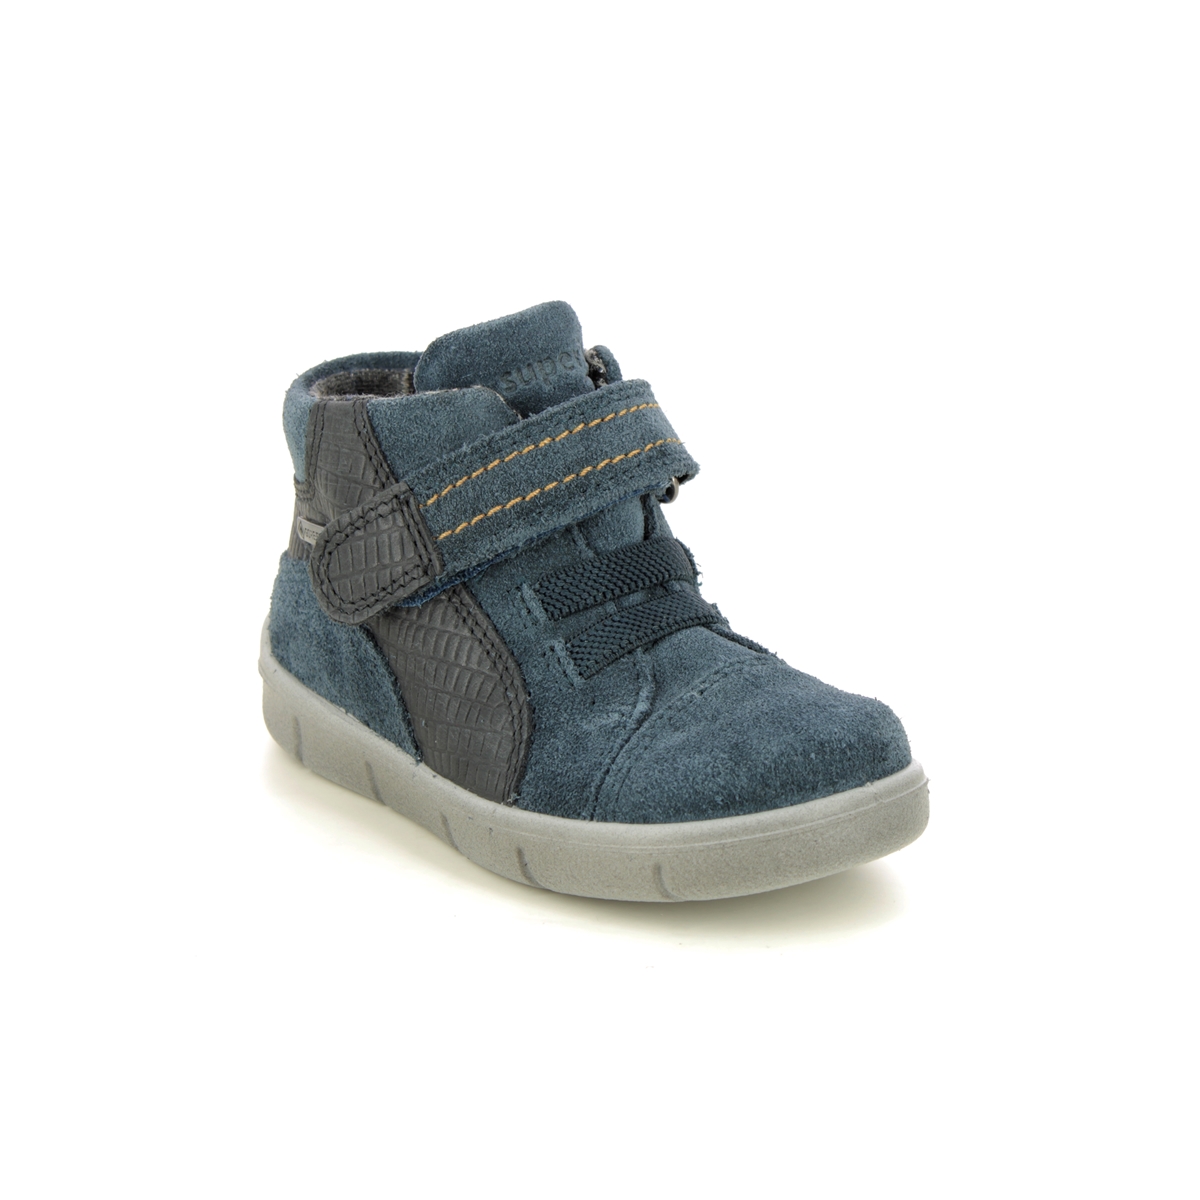 Superfit Ulli Bungee Gtx Blue Suede Kids Toddler Boys Boots 1009429-8000 In Size 22 In Plain Blue Suede For kids